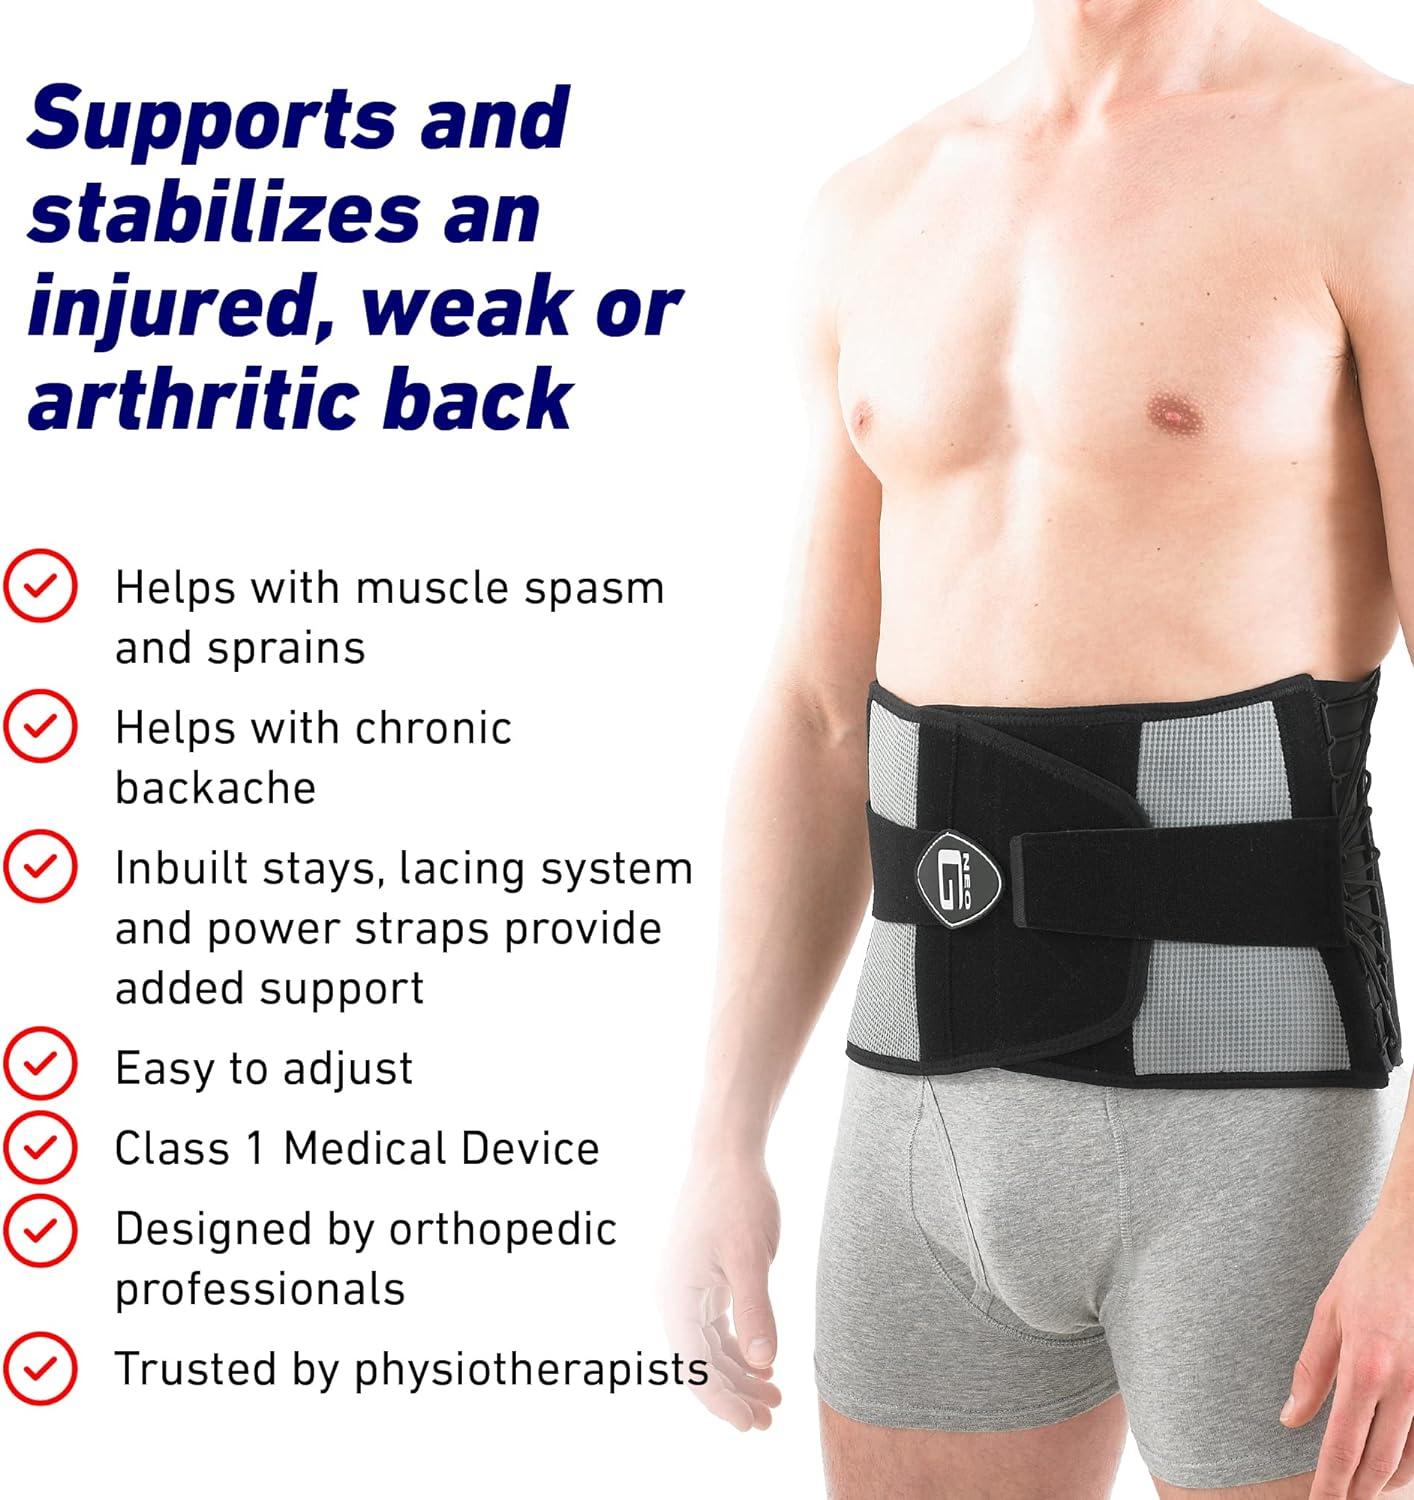 Neo G Back Support RX Stabilized with Power Straps and Adjustable Lacing  System Back Brace for Lower Back Pain Relief Muscle Spasm Strains Arthritis  Rehabilitation - Class 1 Medical Device - S Small